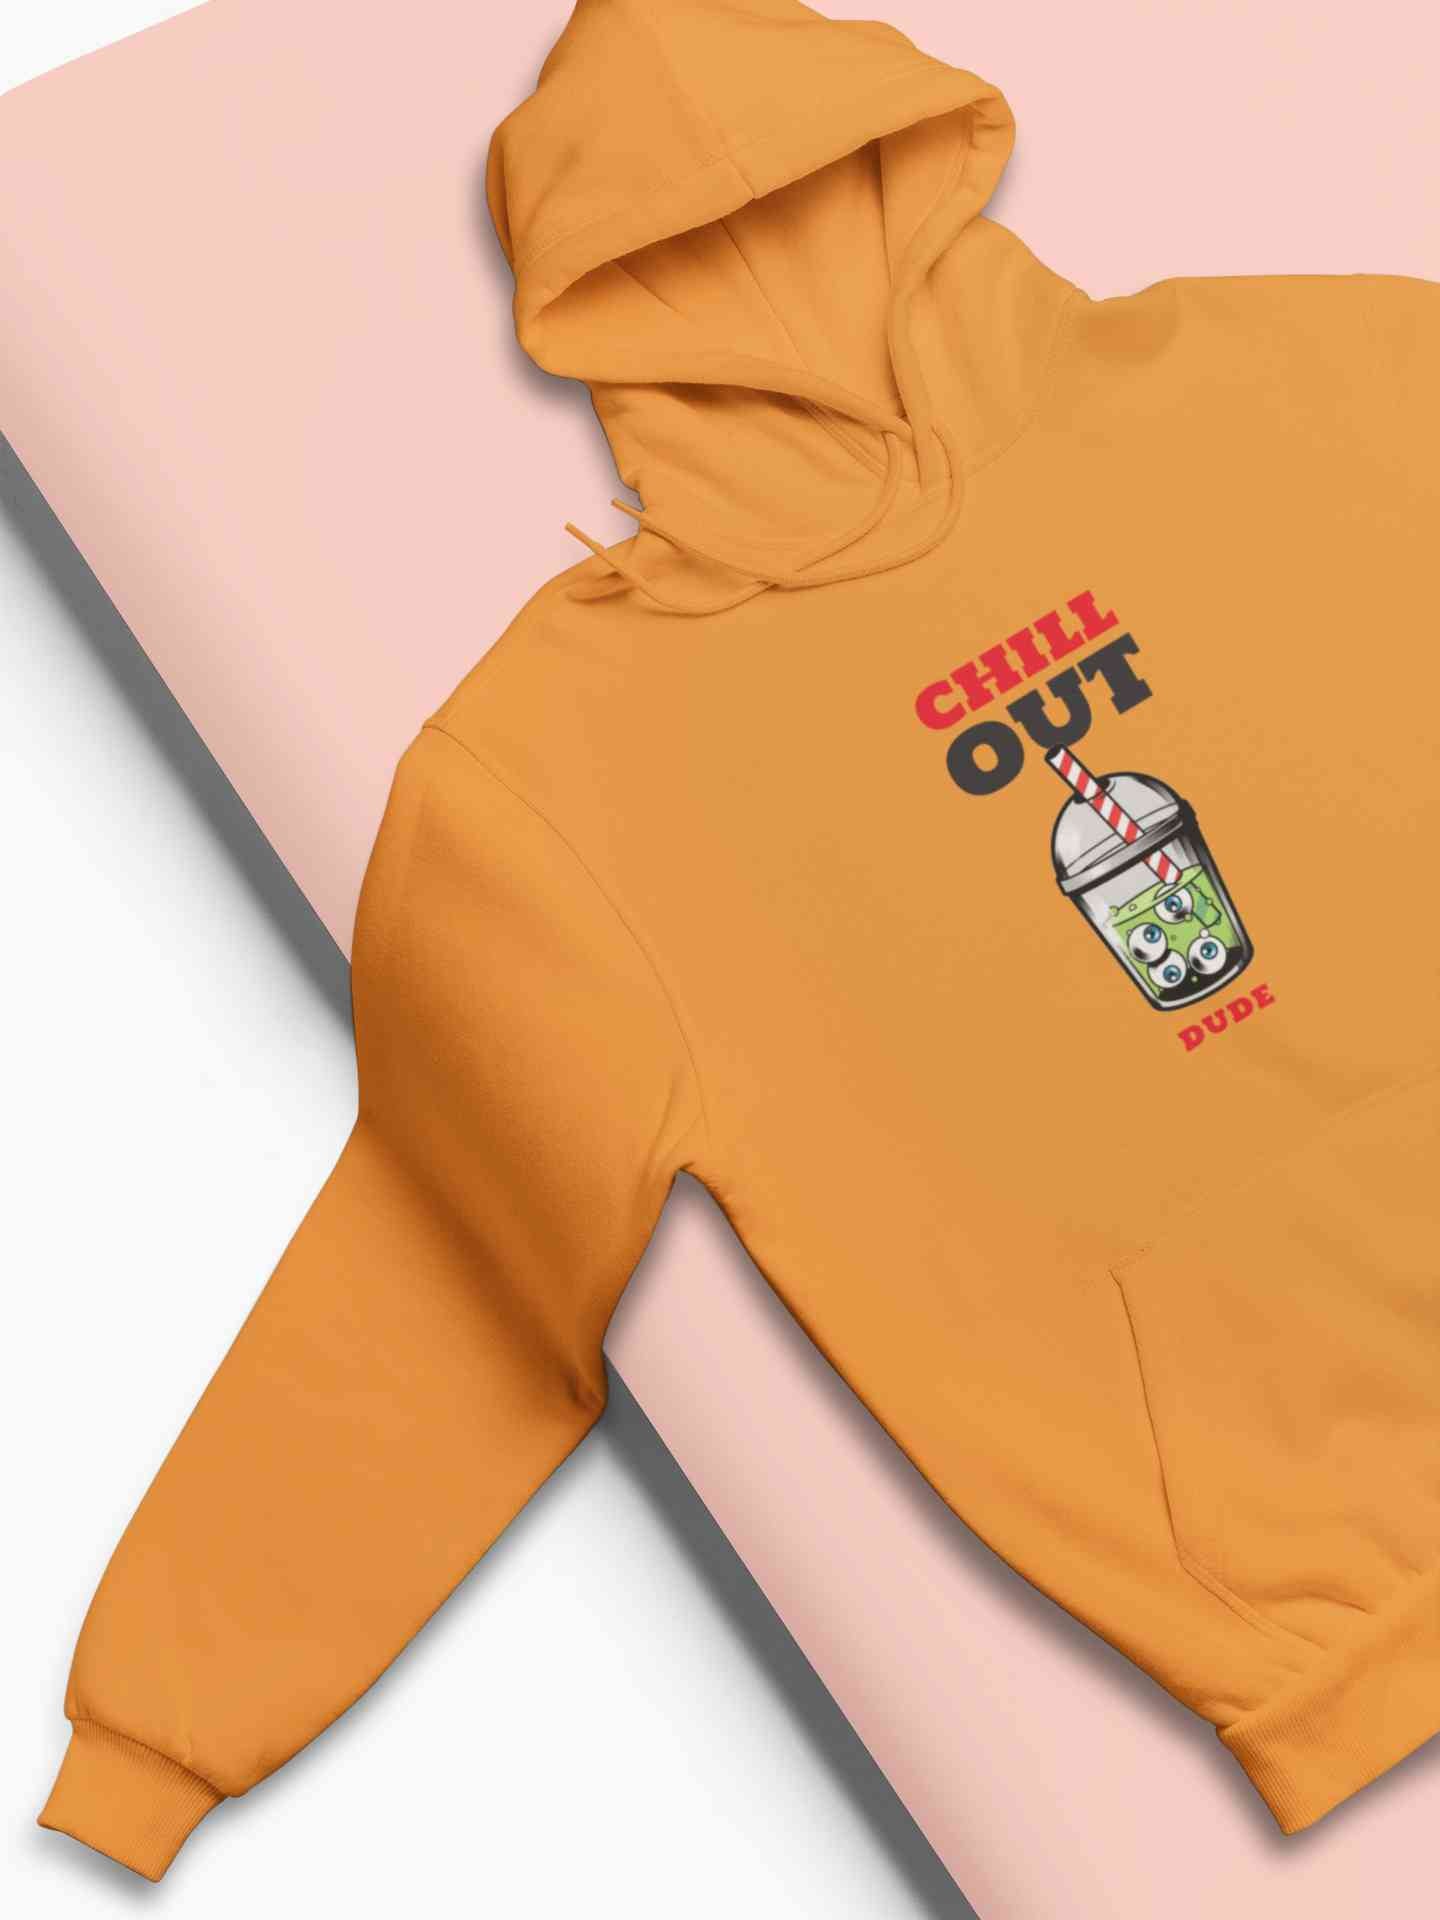 Chill Out Dude Hoodies for Women-FunkyTeesClub